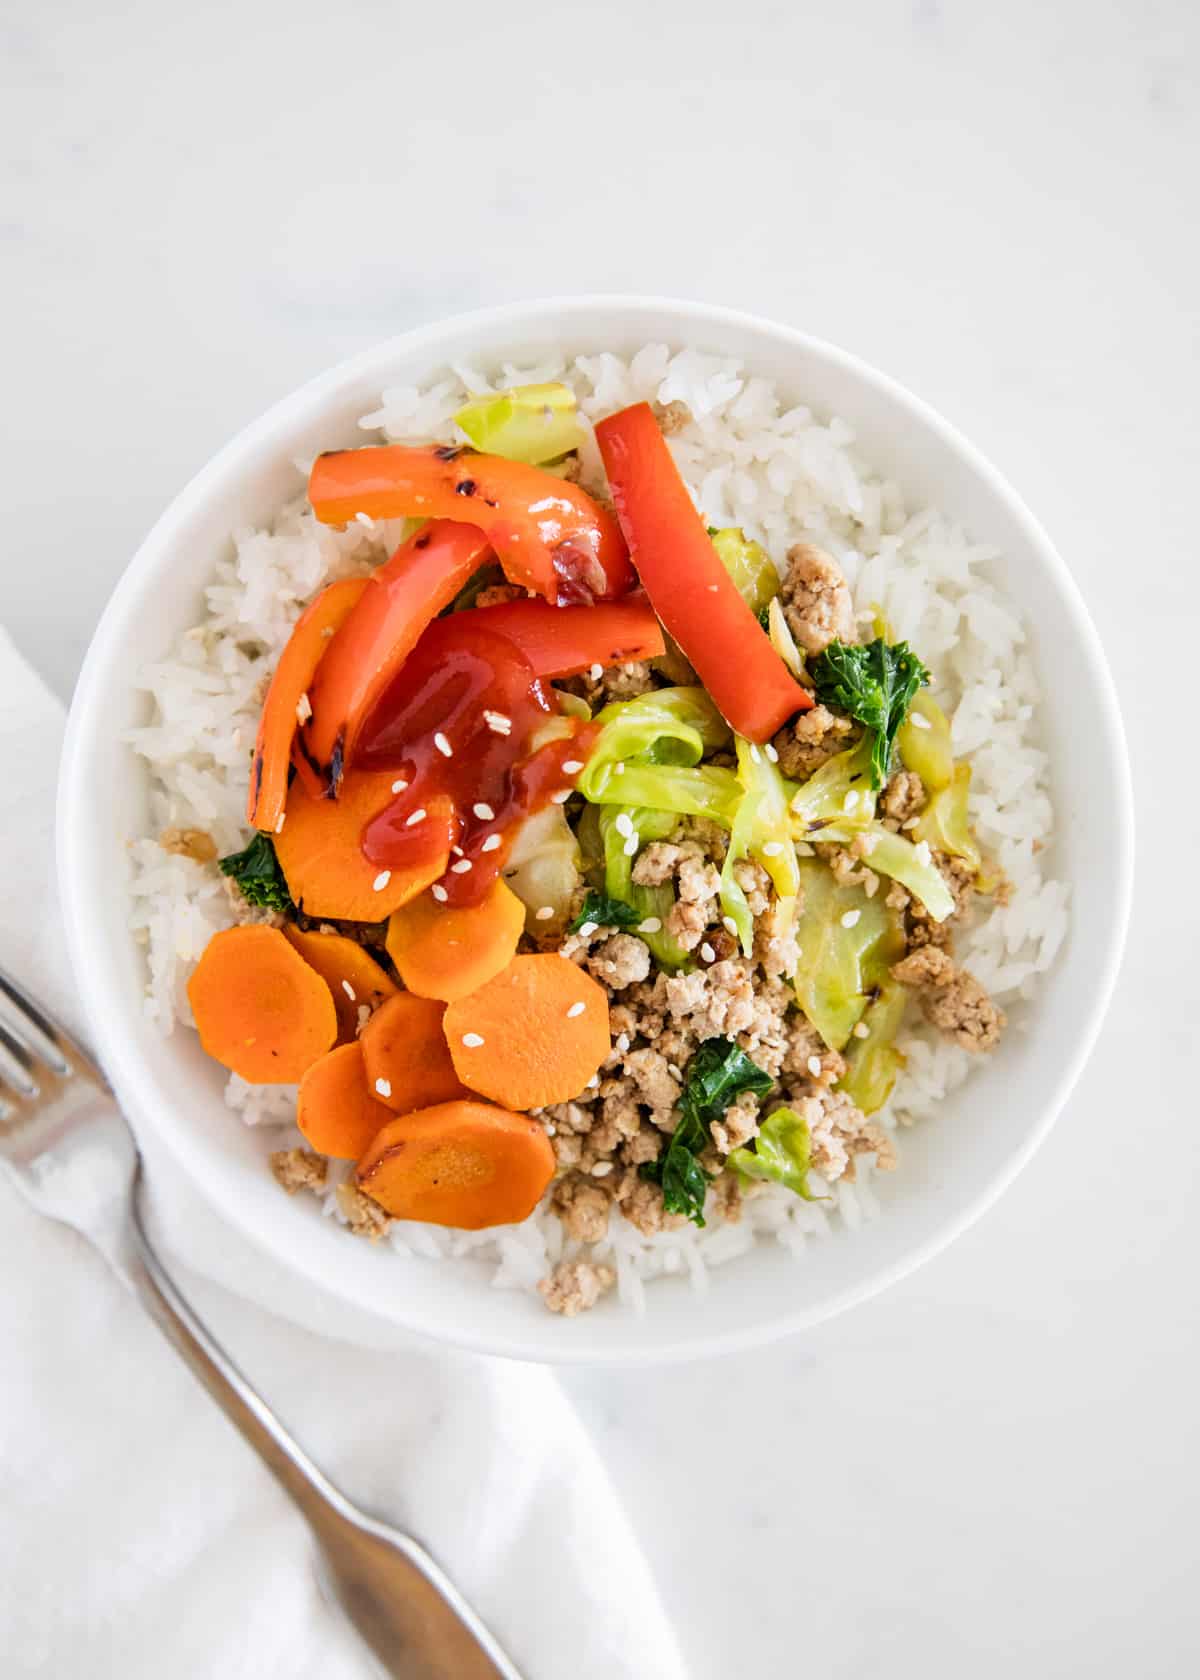 ground turkey with vegetables and rice in bowl